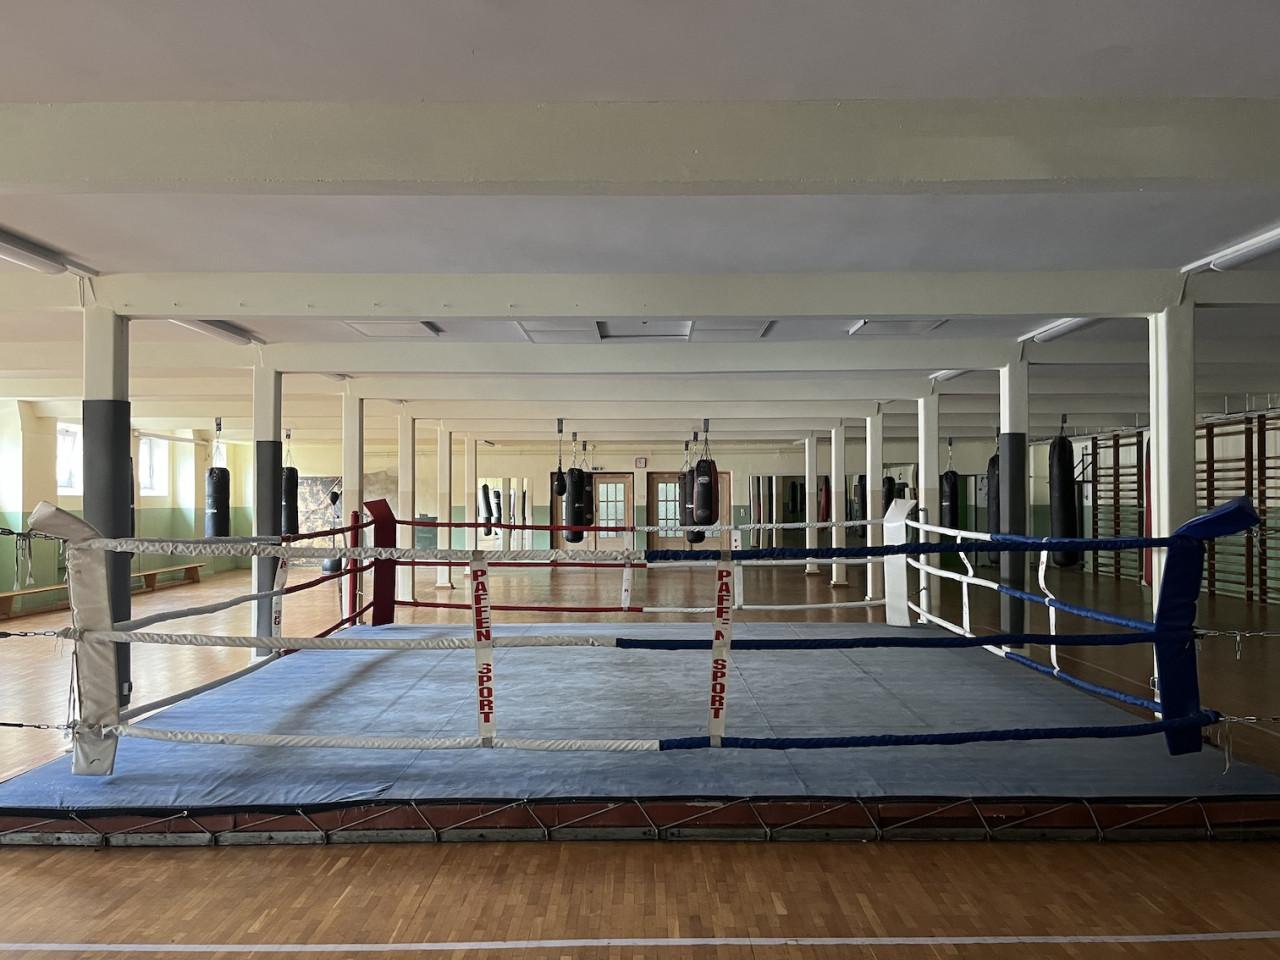 plush74 location film photo event germany berlin vintage gym fitness boxing 168